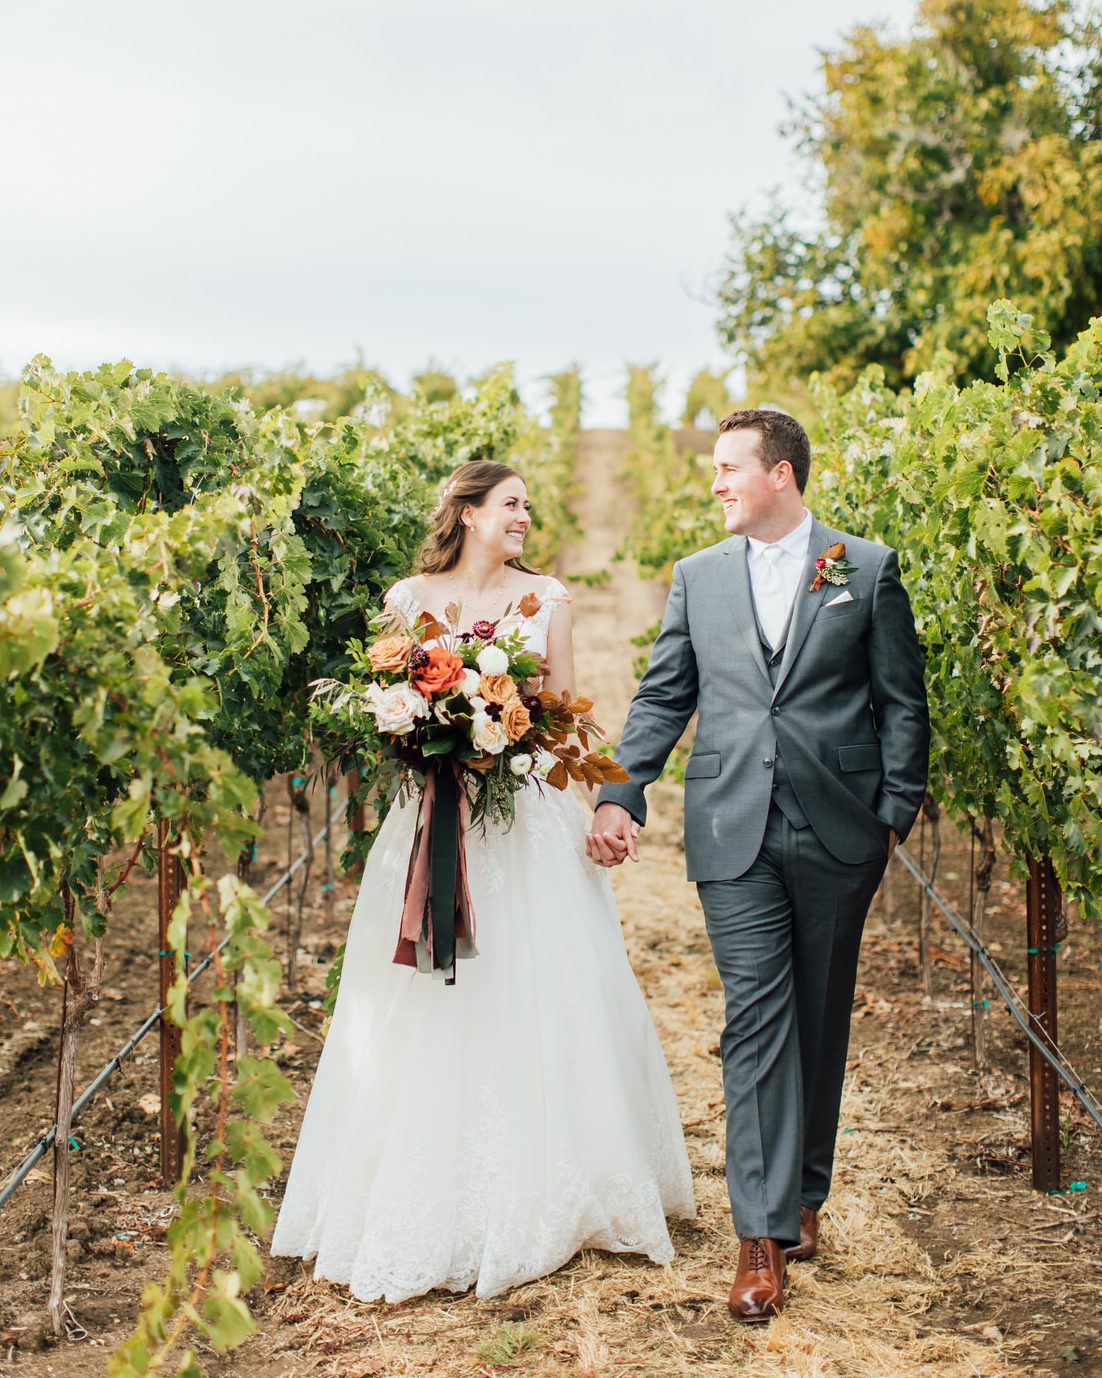 Best San Luis Obispo Winery Wedding Venues in Paso Robles Opolo Vineyard bride and groom walking in vines by photographer Jessica Sofranko